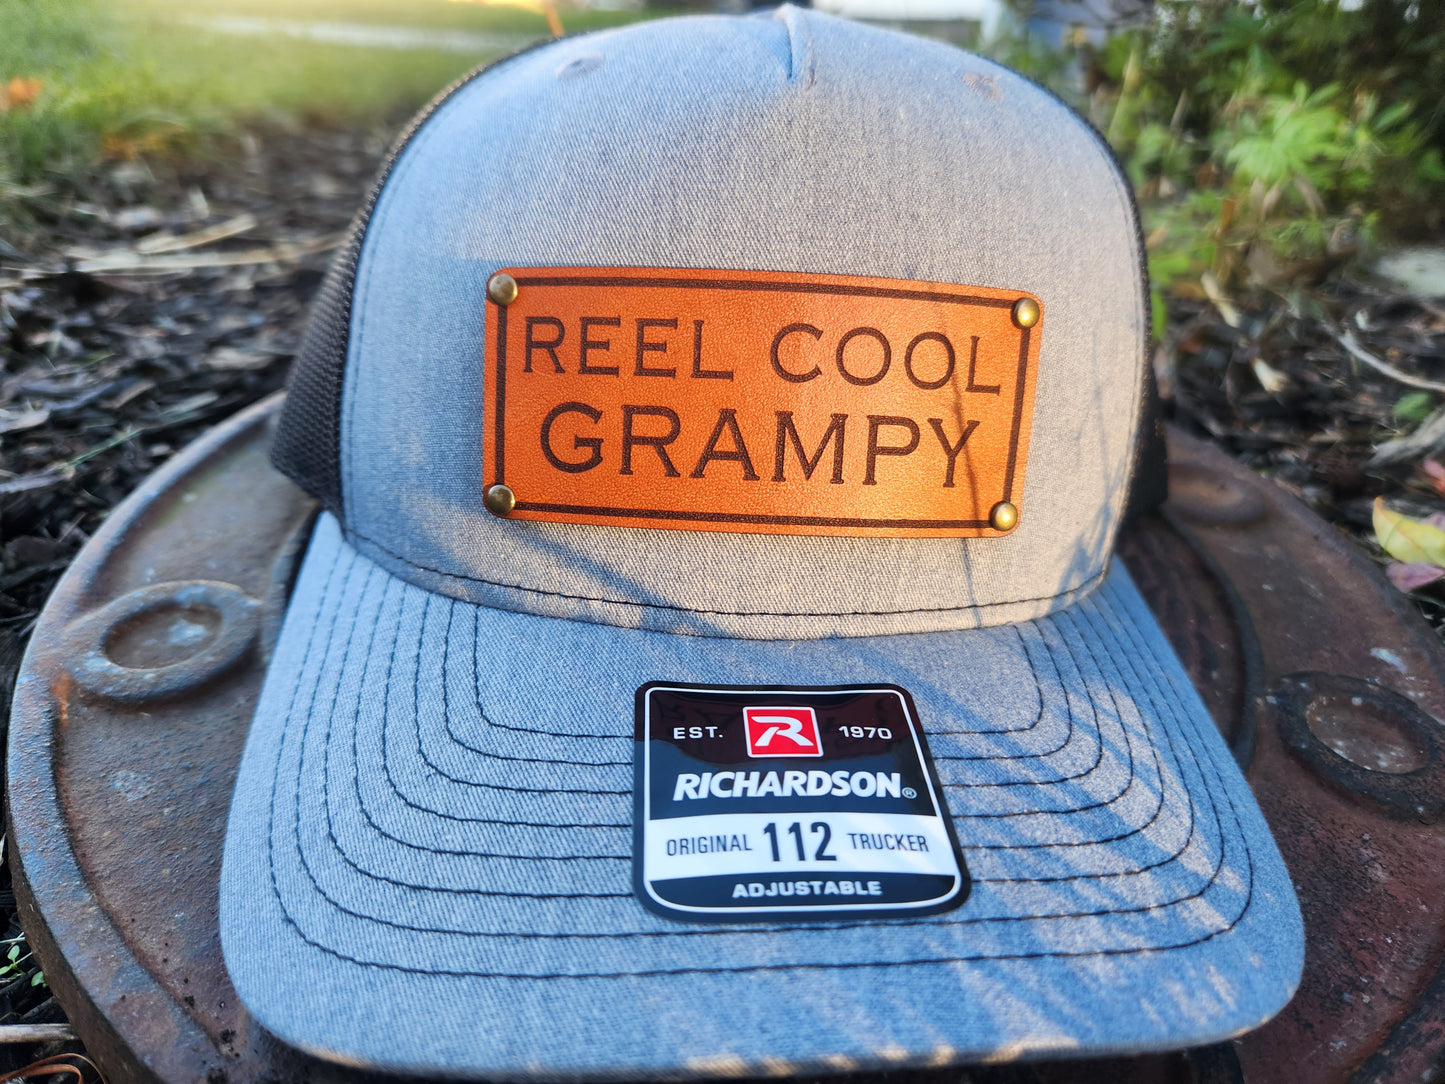 REEL COOL GRAMPY hat - Fishing hat for Grandfather